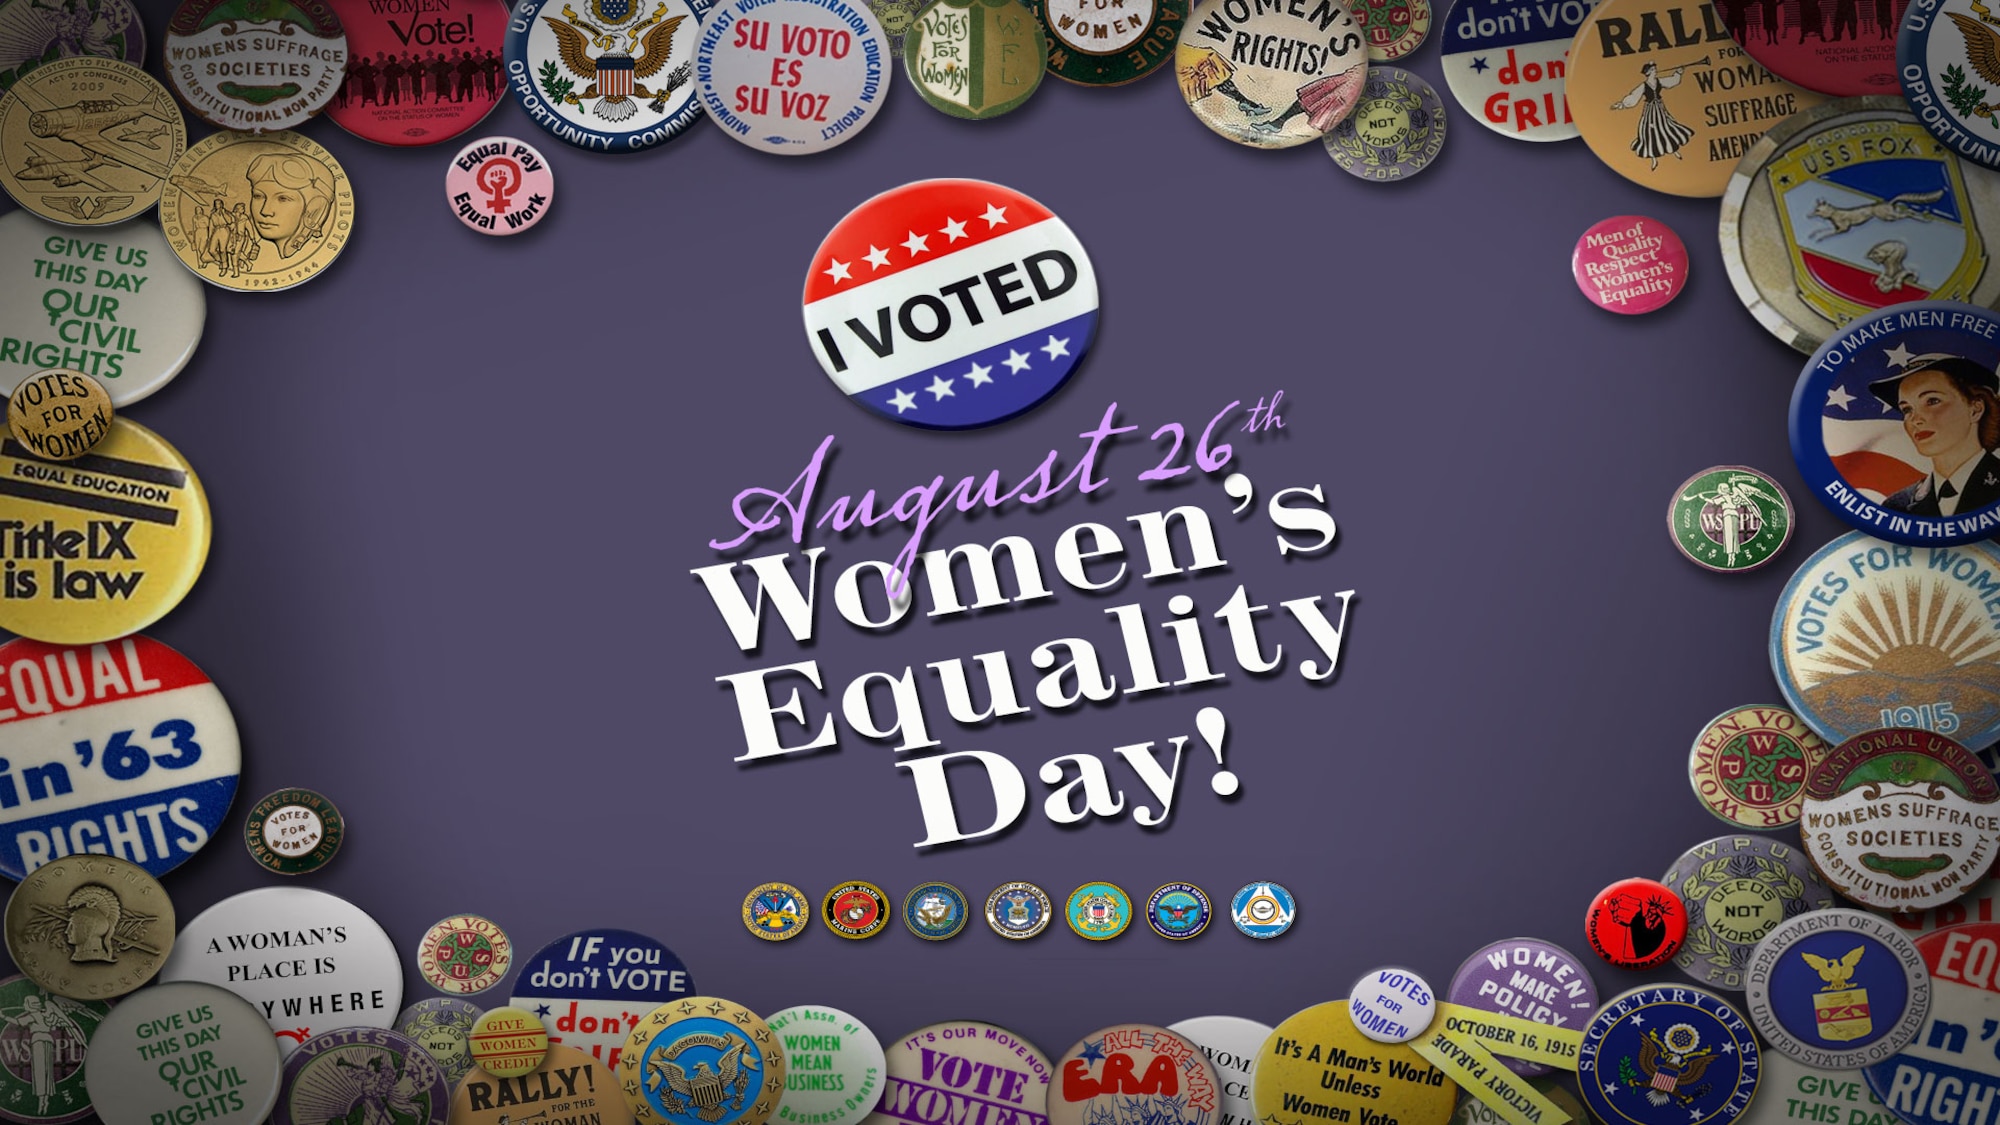 The observance recognizing Women's Equality Day was established by Joint Resolution of Congress in 1971. Women's Equality Day is observed on the 26th day of August and commemorates the 1920 passage of the 19th Amendment to the Constitution, which gave women the right to vote. The observance has grown to include focusing attention on women's continued efforts toward gaining full equality. (Department of Defense graphic)